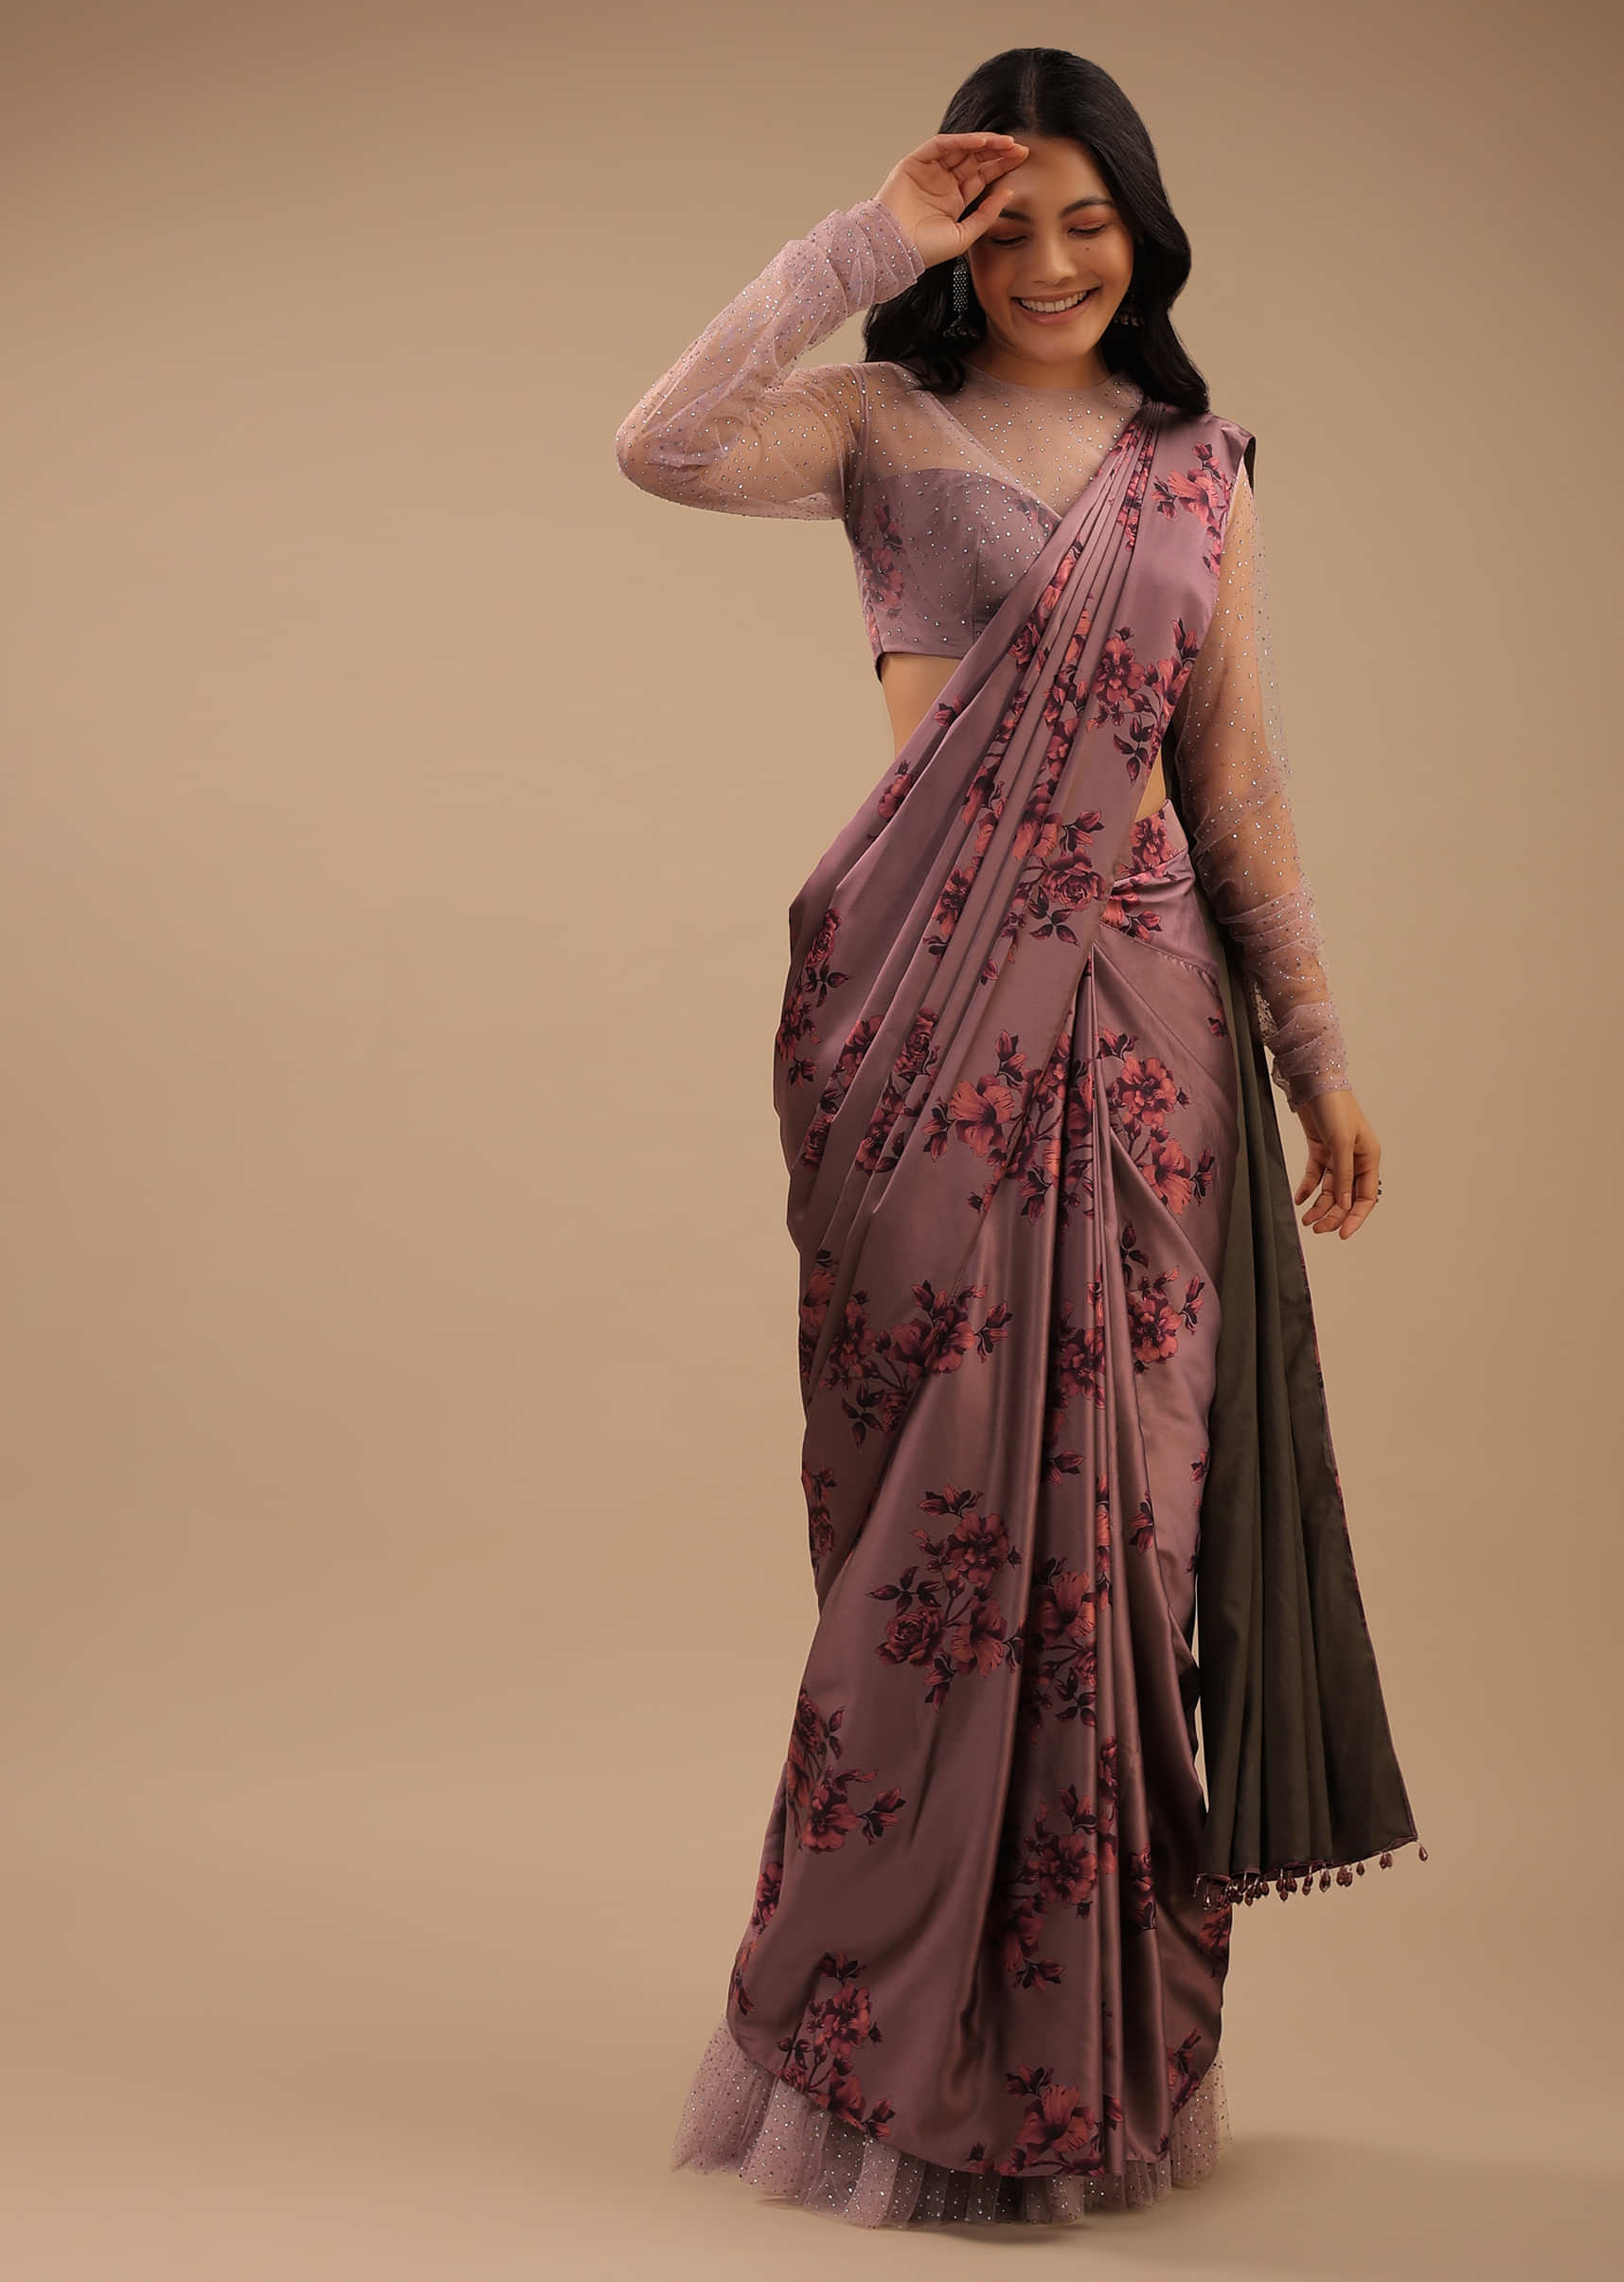 Dusty Mauve Ready Pleated Satin Saree With Floral Print And Stone Embellished Blouse